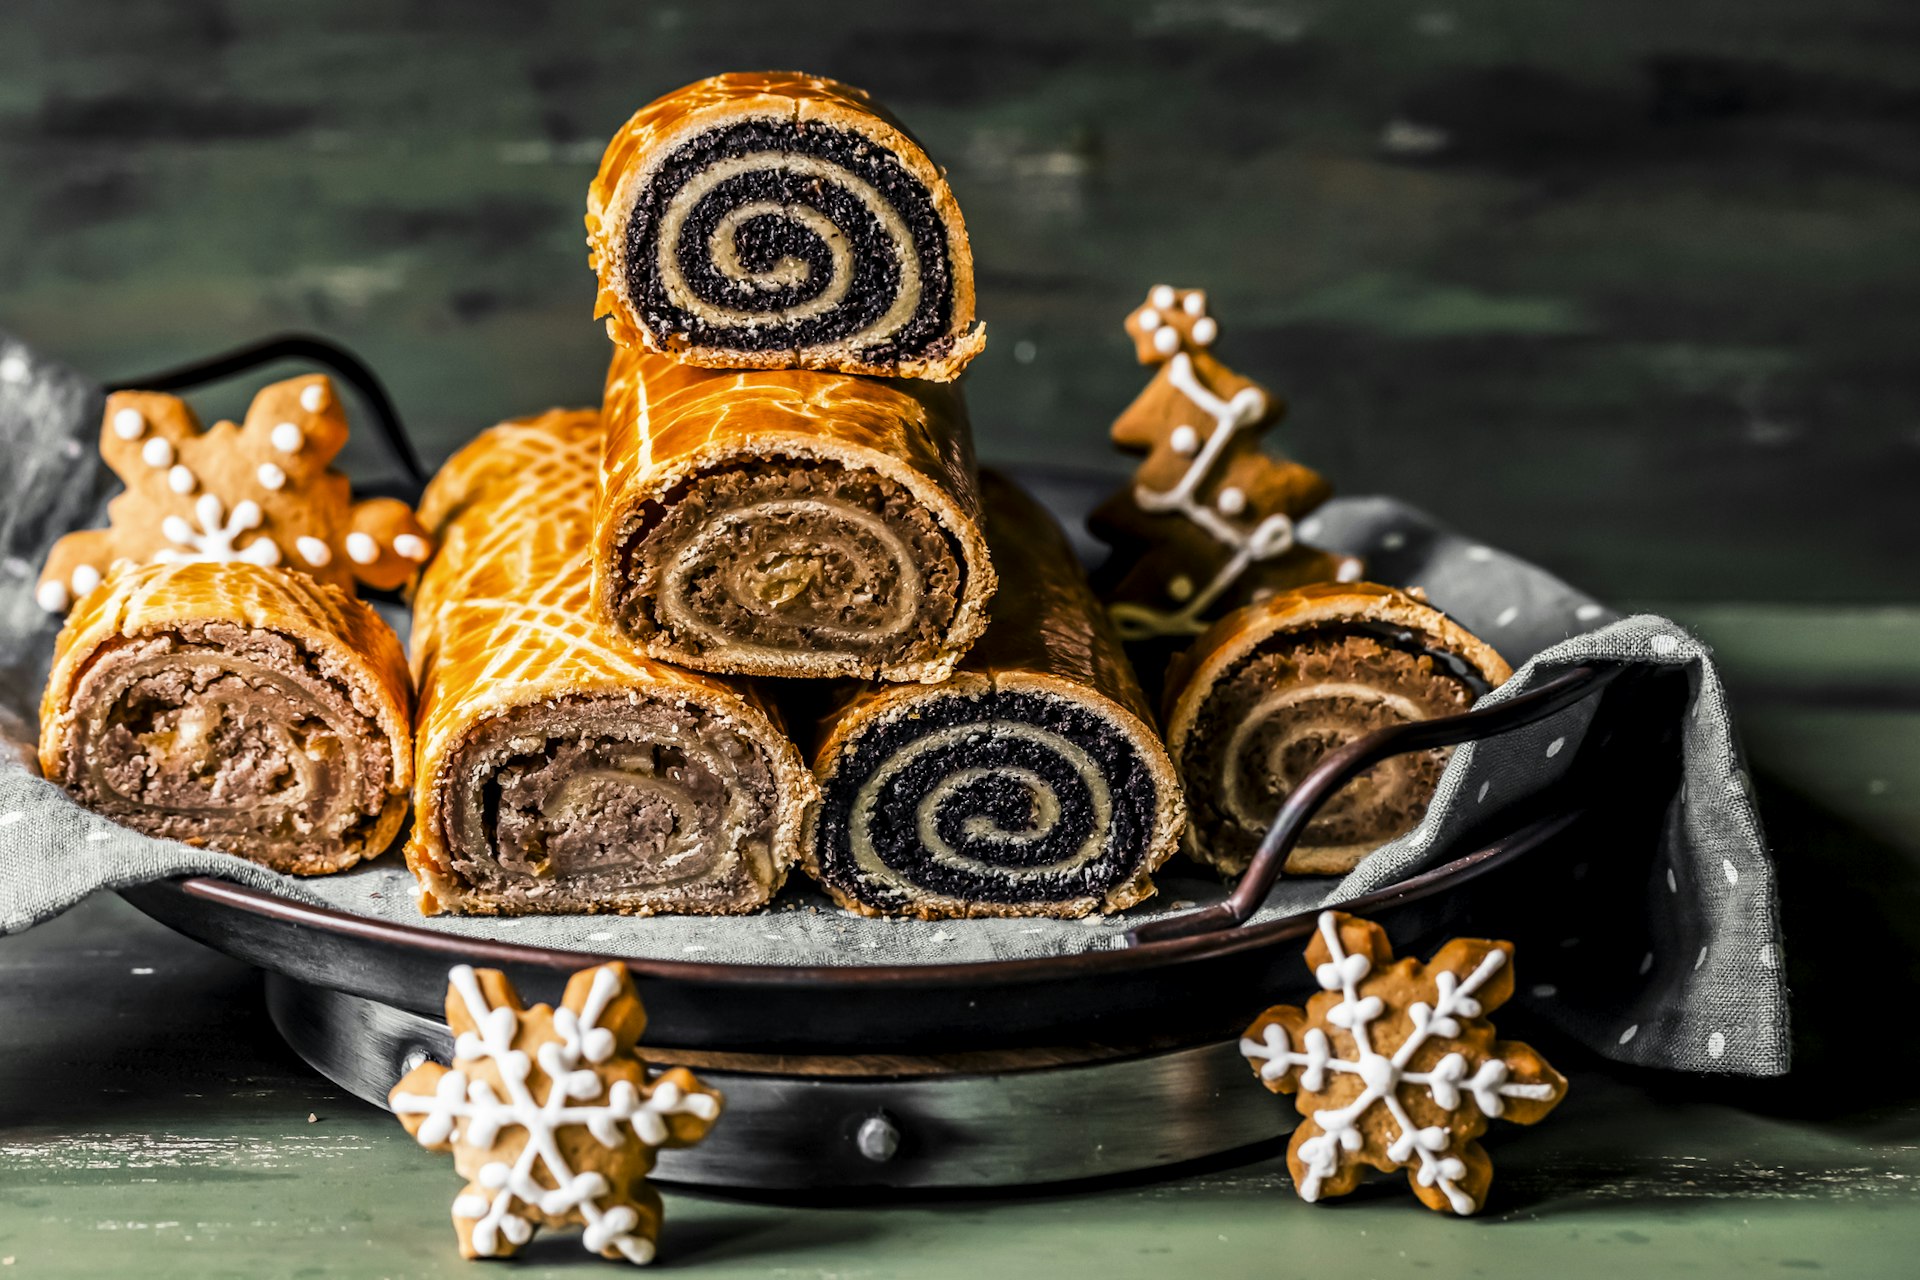 A pile of Hungarian beigli cake cut to show the swirling center and piled high surrounded by Christmas decorations